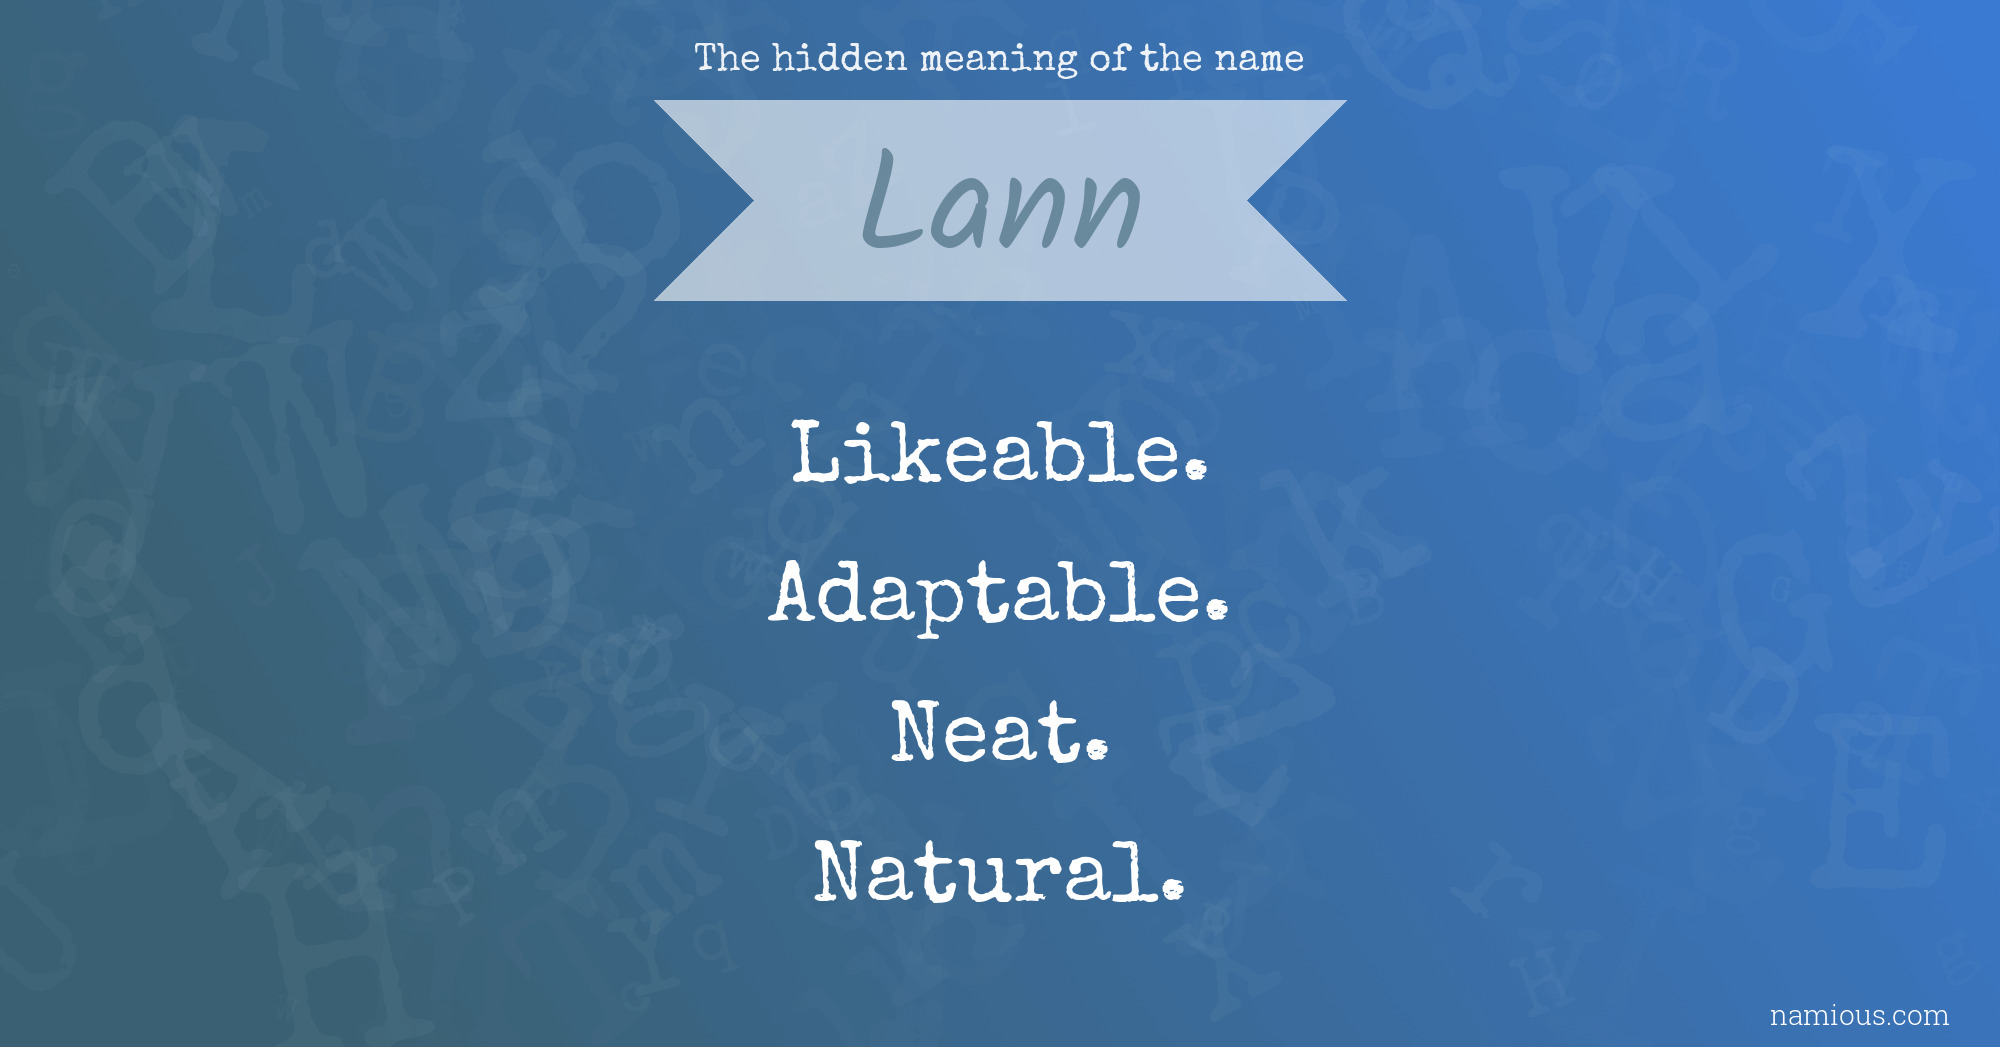 The hidden meaning of the name Lann